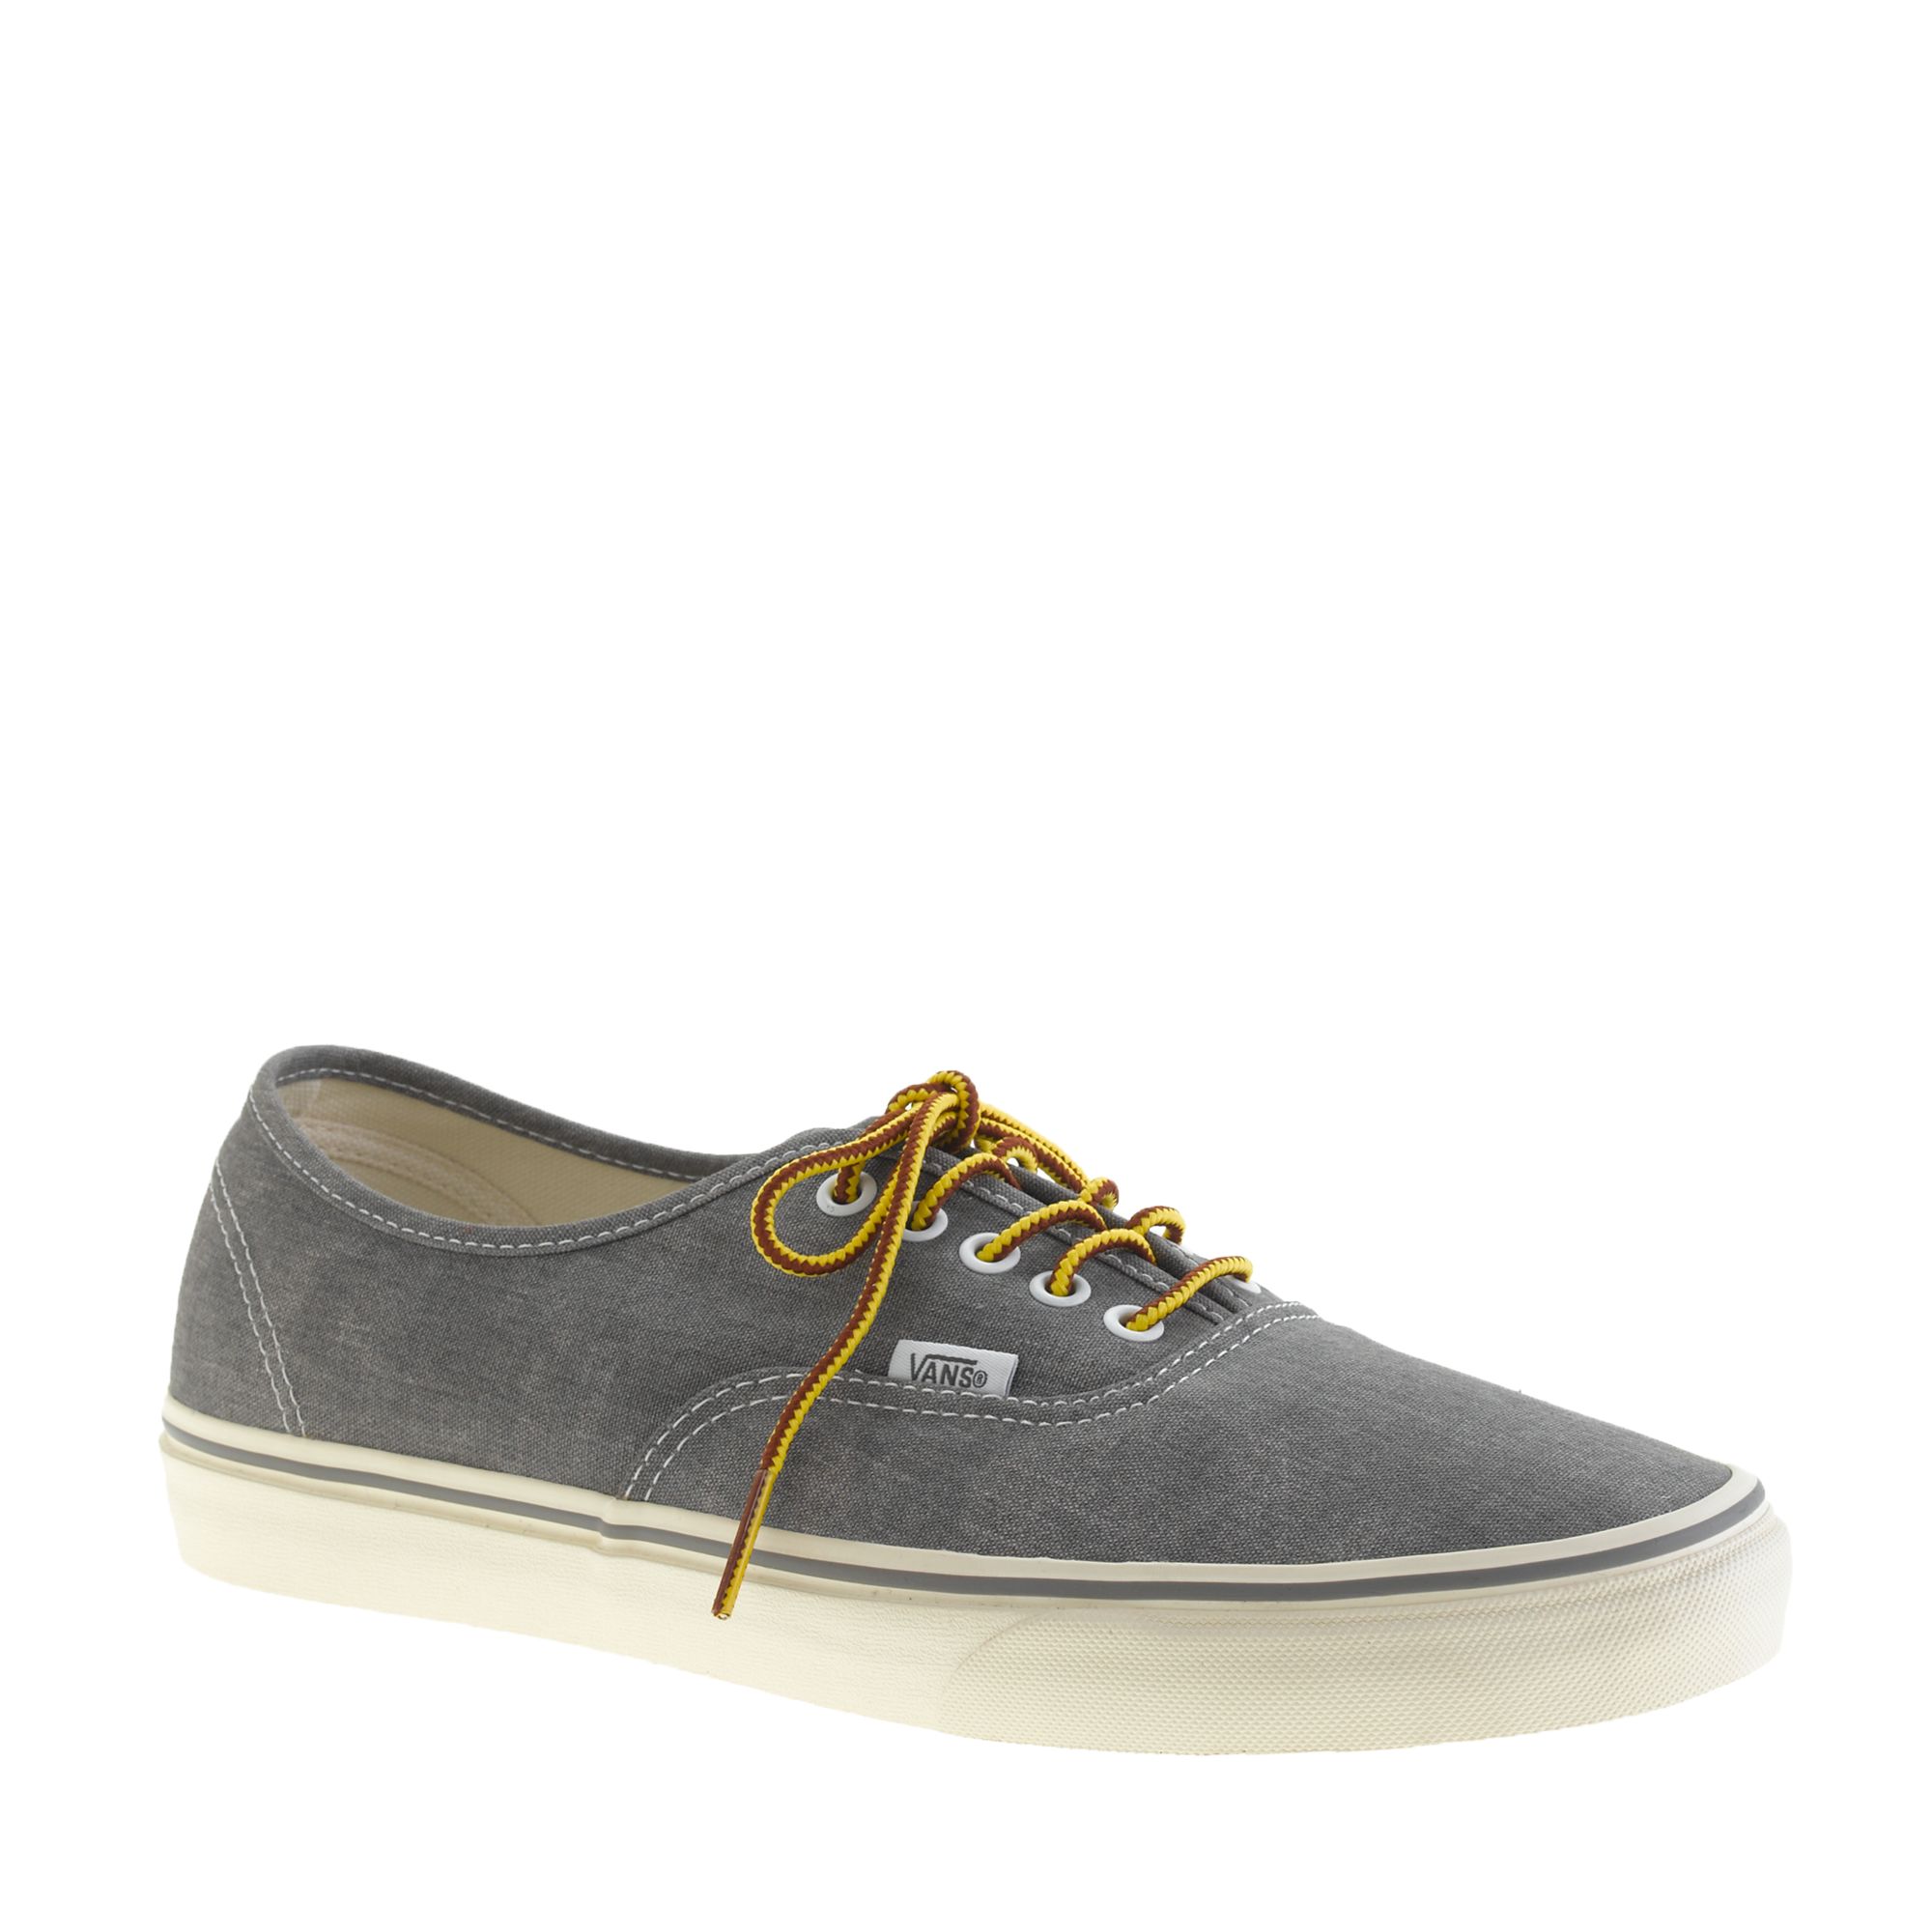 J.crew Vans Washed Canvas Authentic Sneakers in Silver for